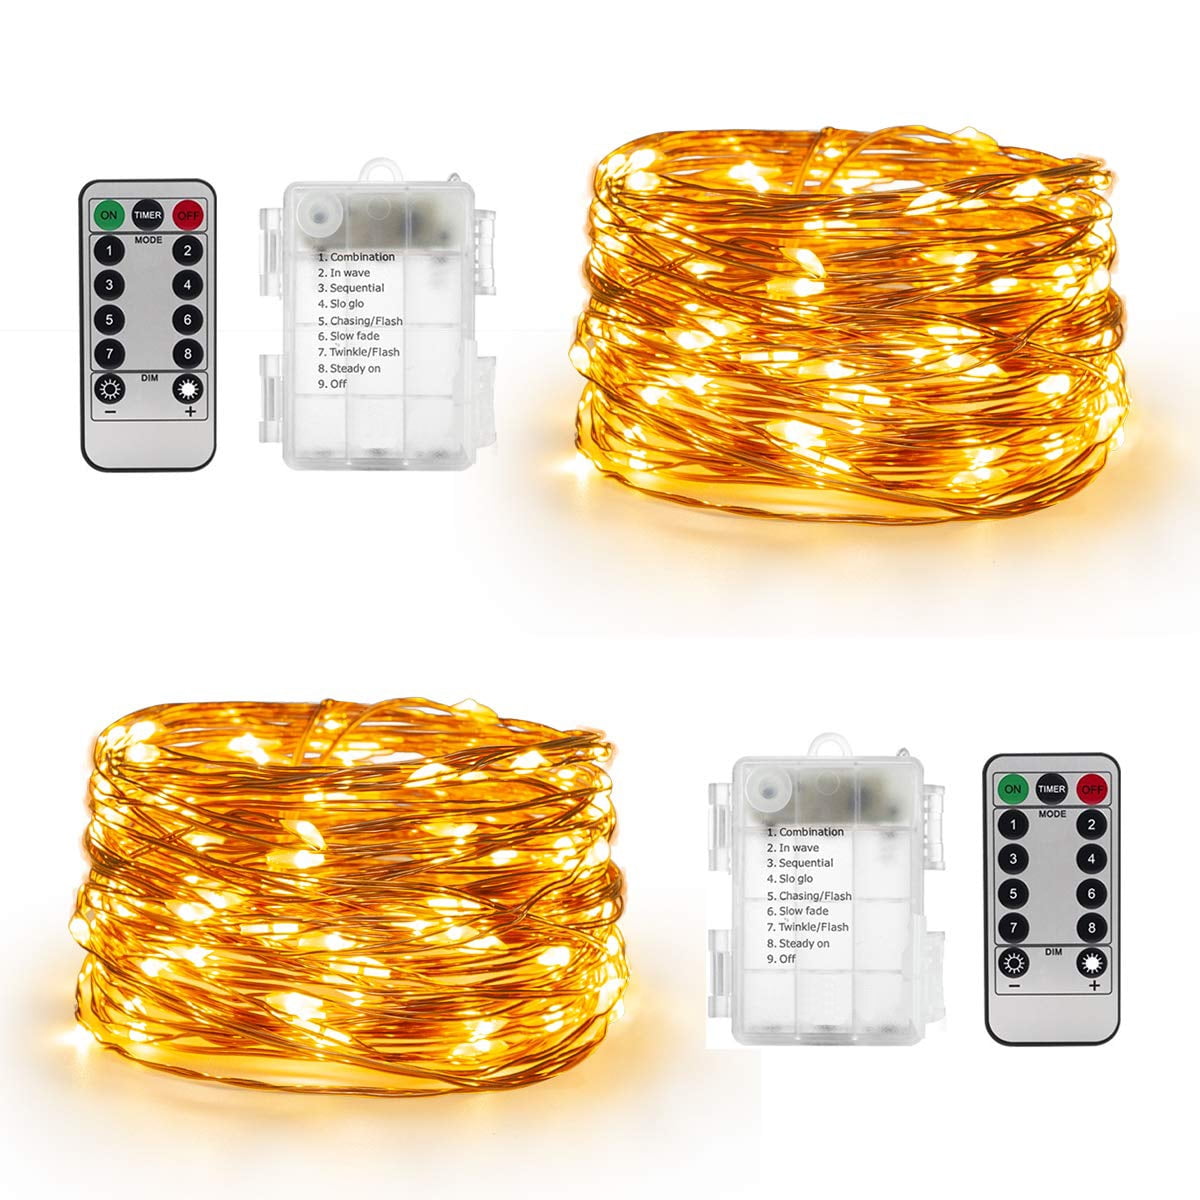 10M 100LEDs AA Battery LED Lights String Fairy Copper Wire Outdoor Home Decor ED 